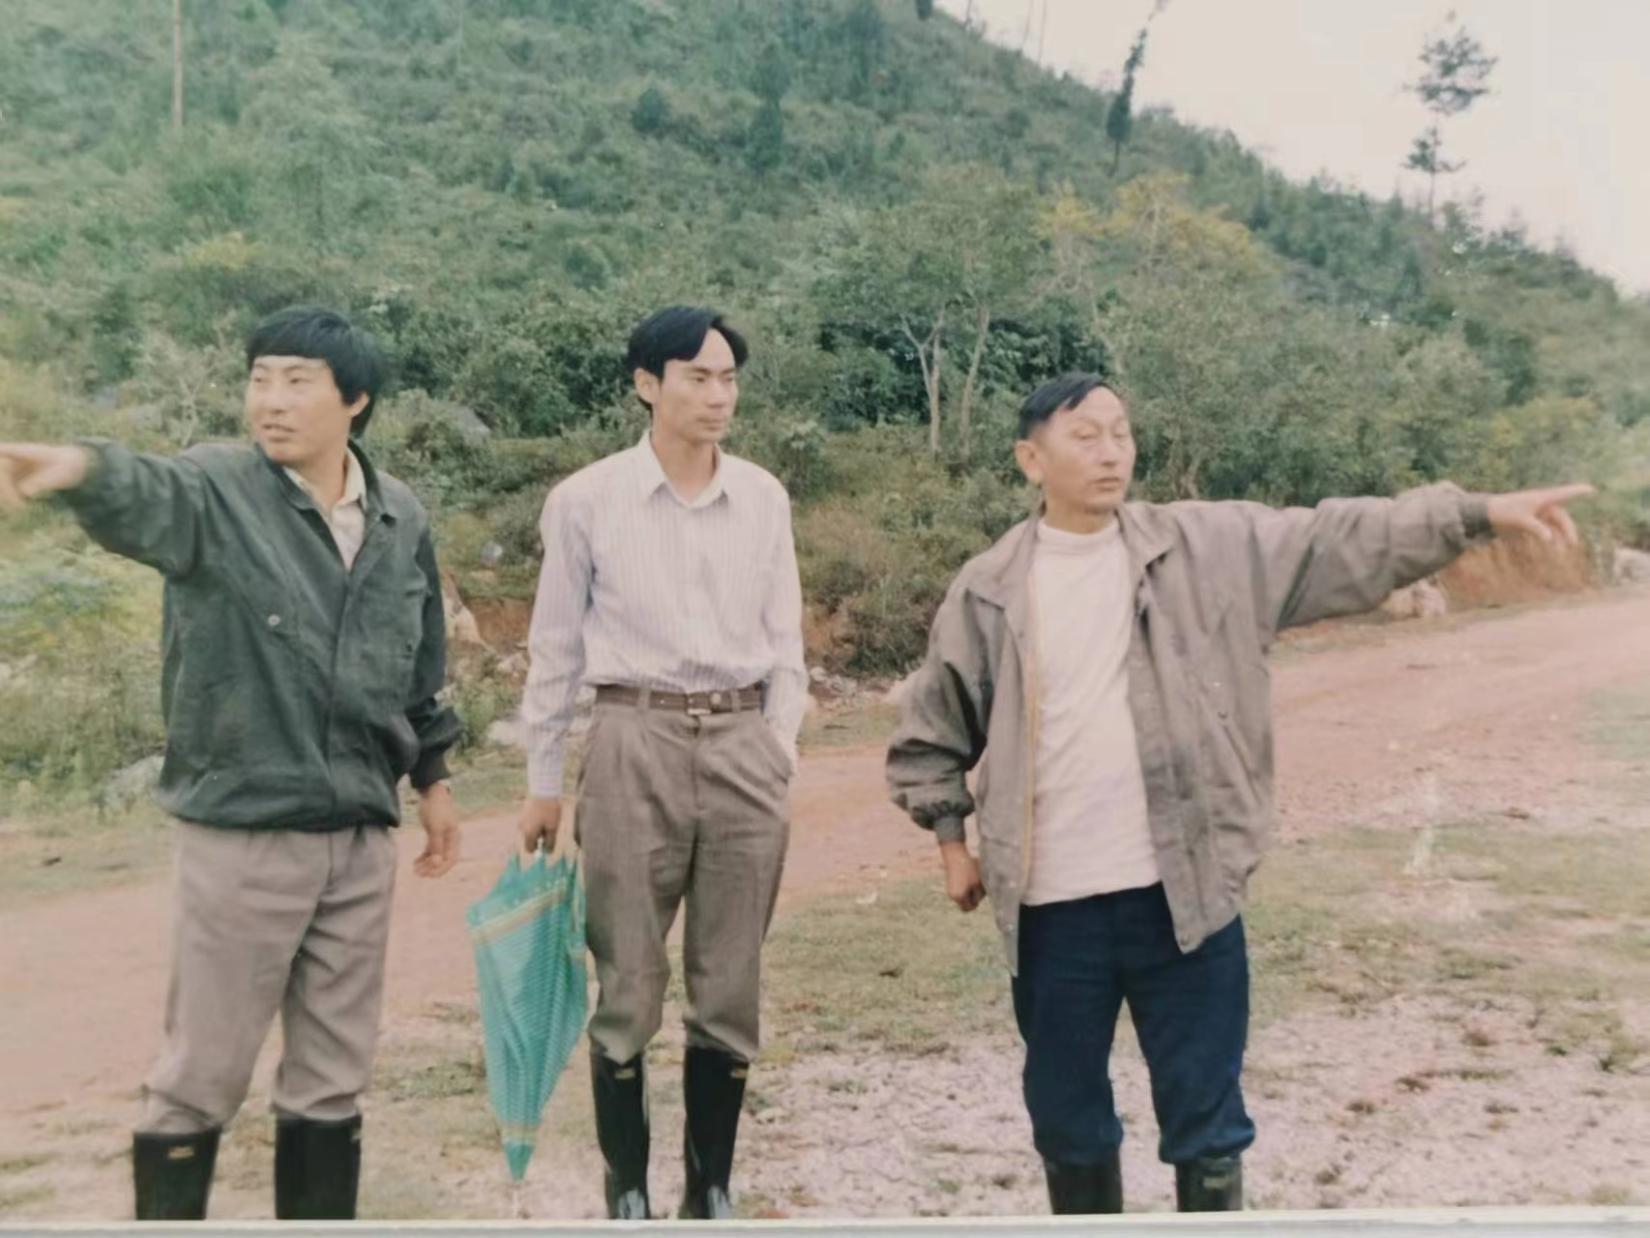 In 1996, Dr. Sixi Qu worked in the WFP food assistance project area in Xiangxi region